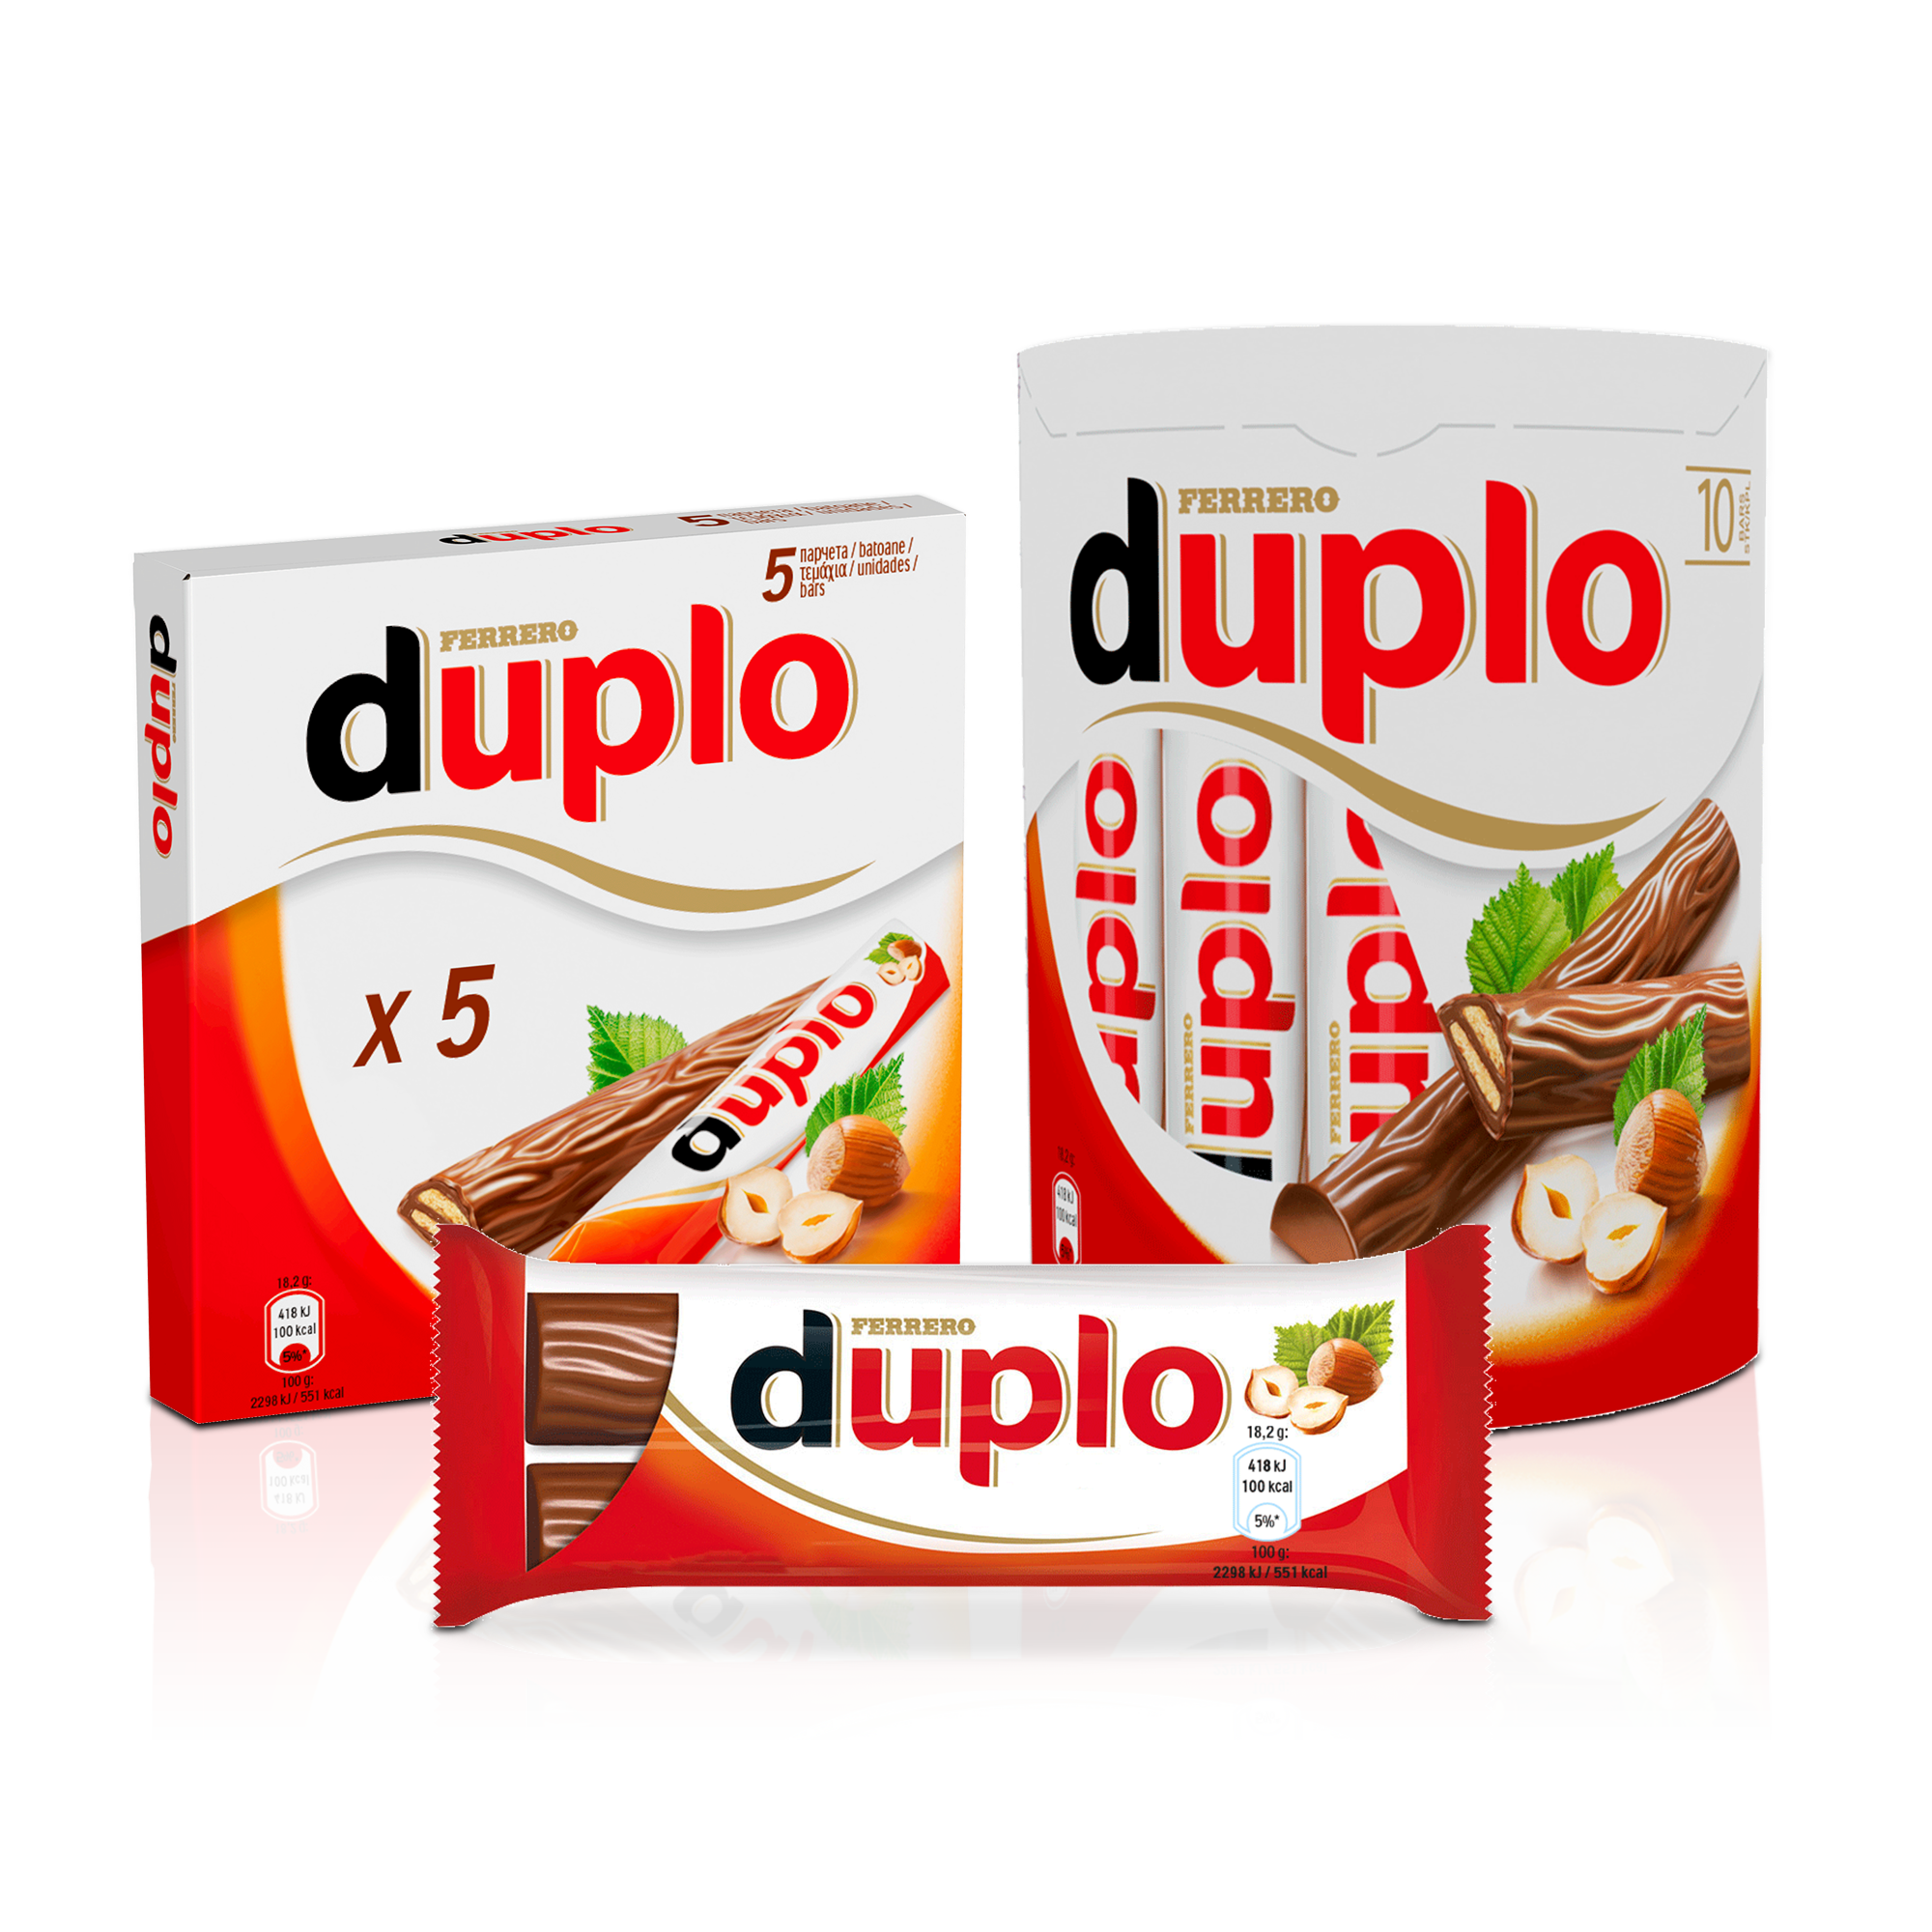 Ferrero launches Duplo – a new chocolate biscuit bar